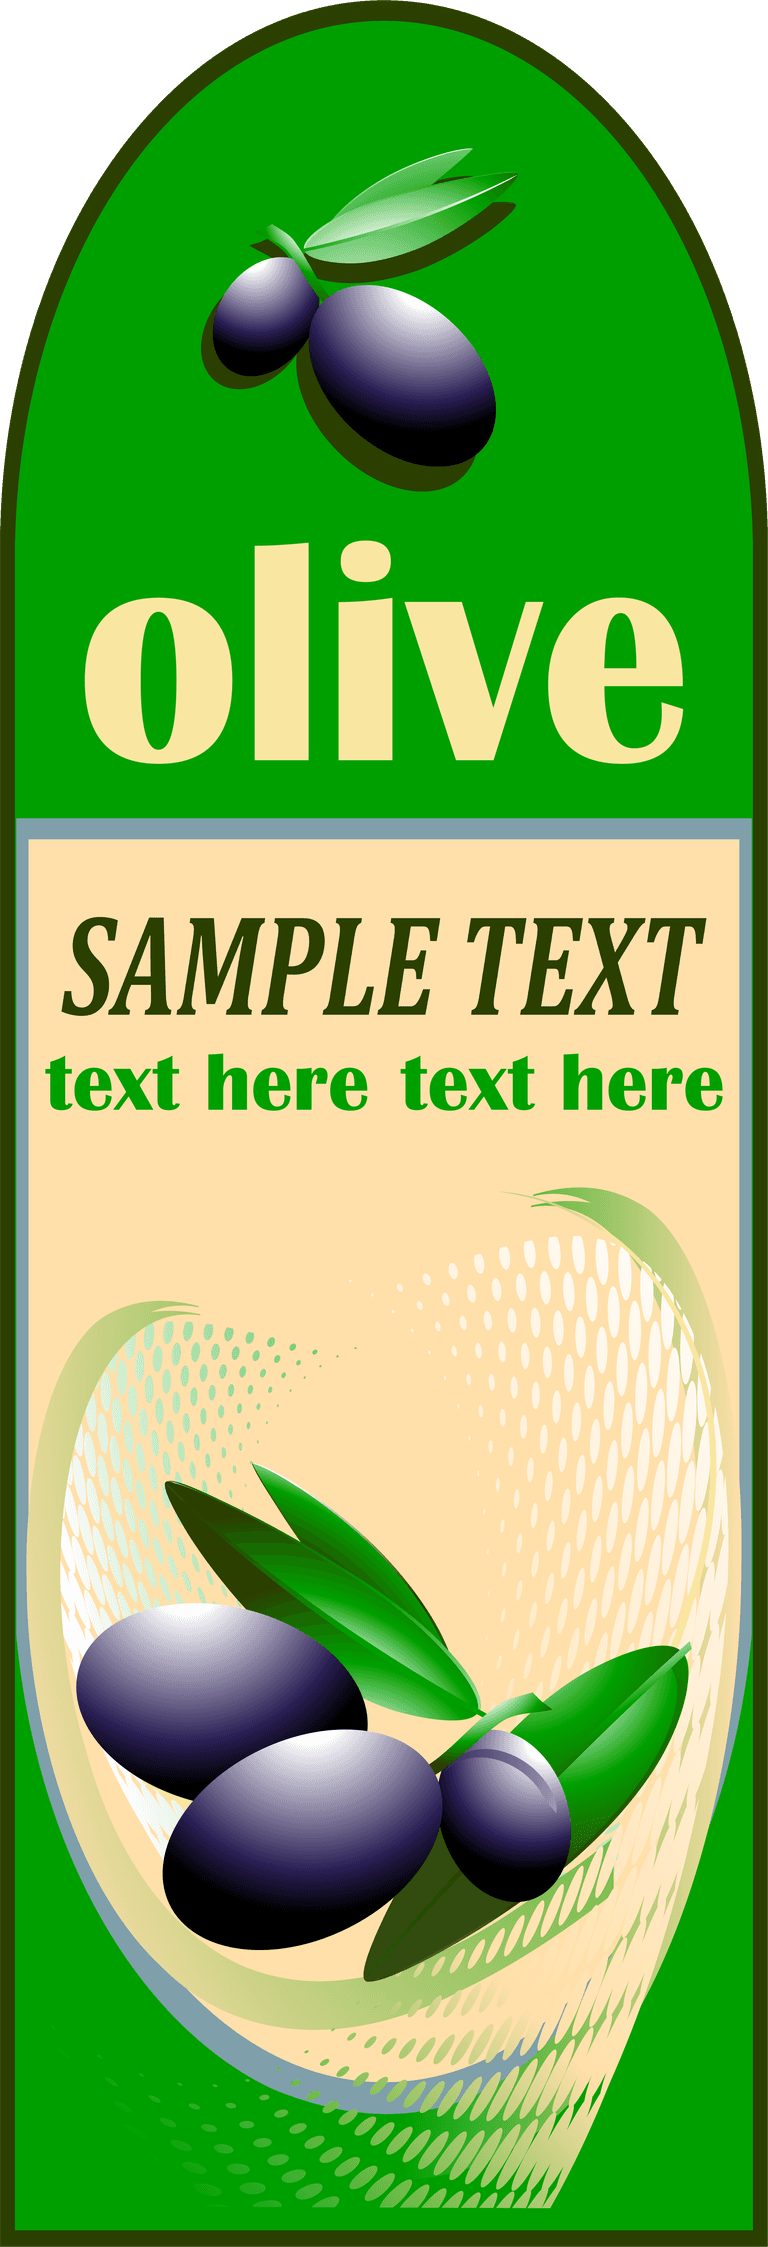 olive oil label stickers vector